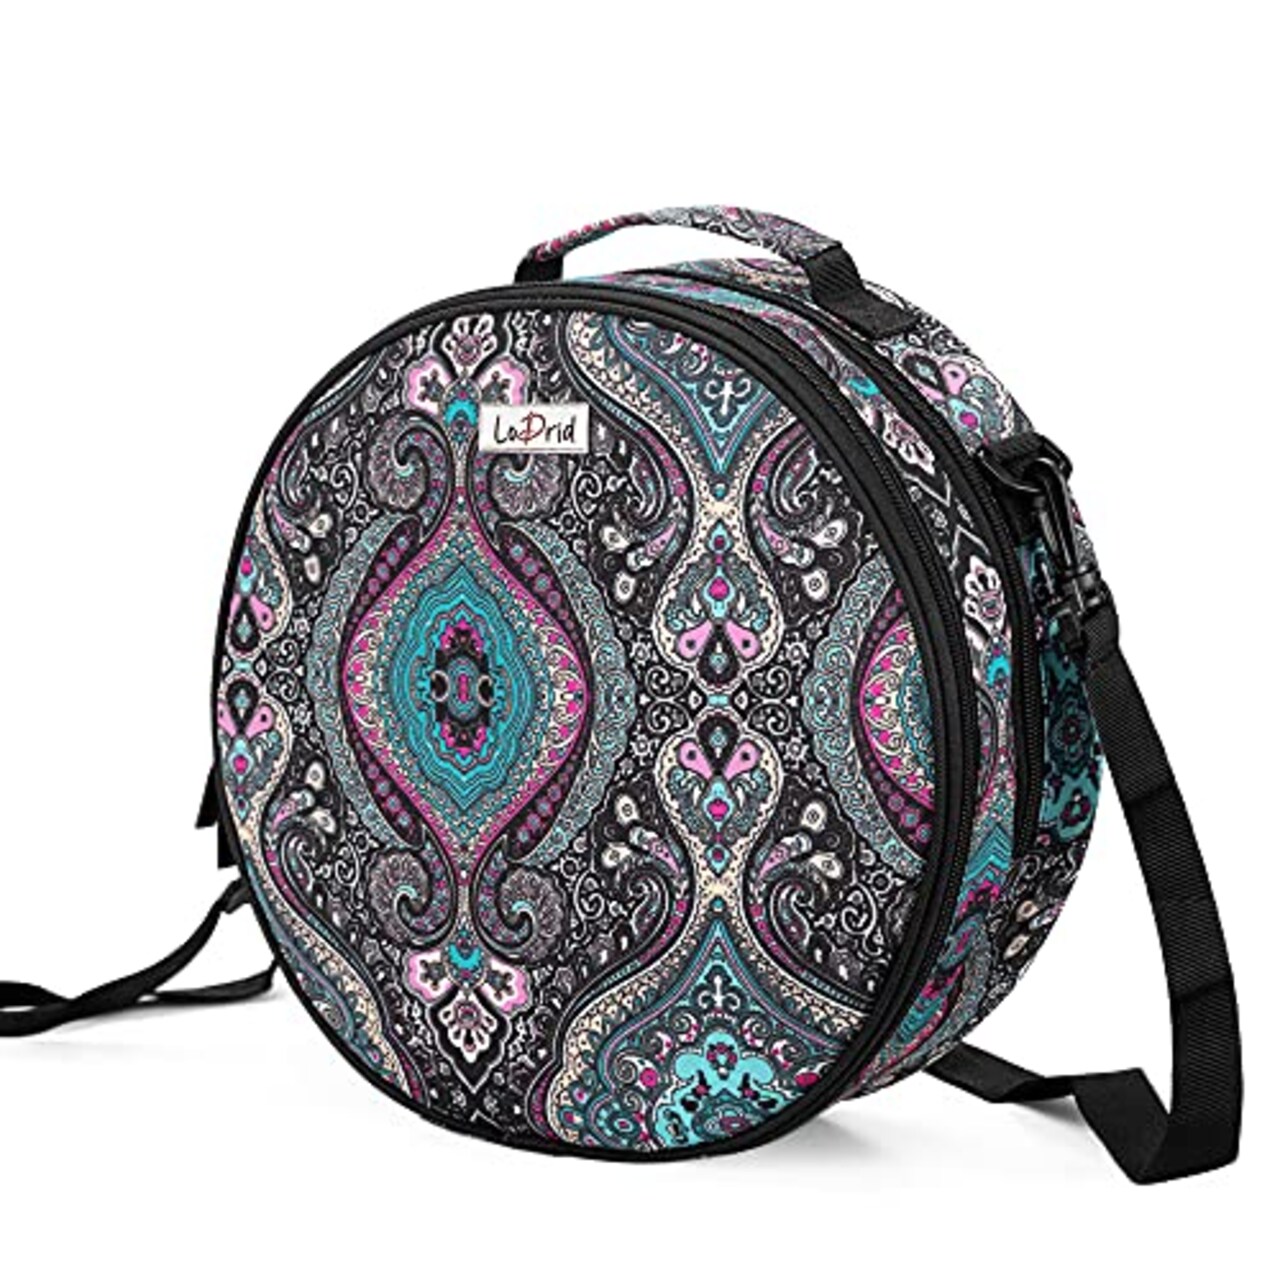 LoDrid Embroidery Bag, Double-Layer Round Embroidery Project